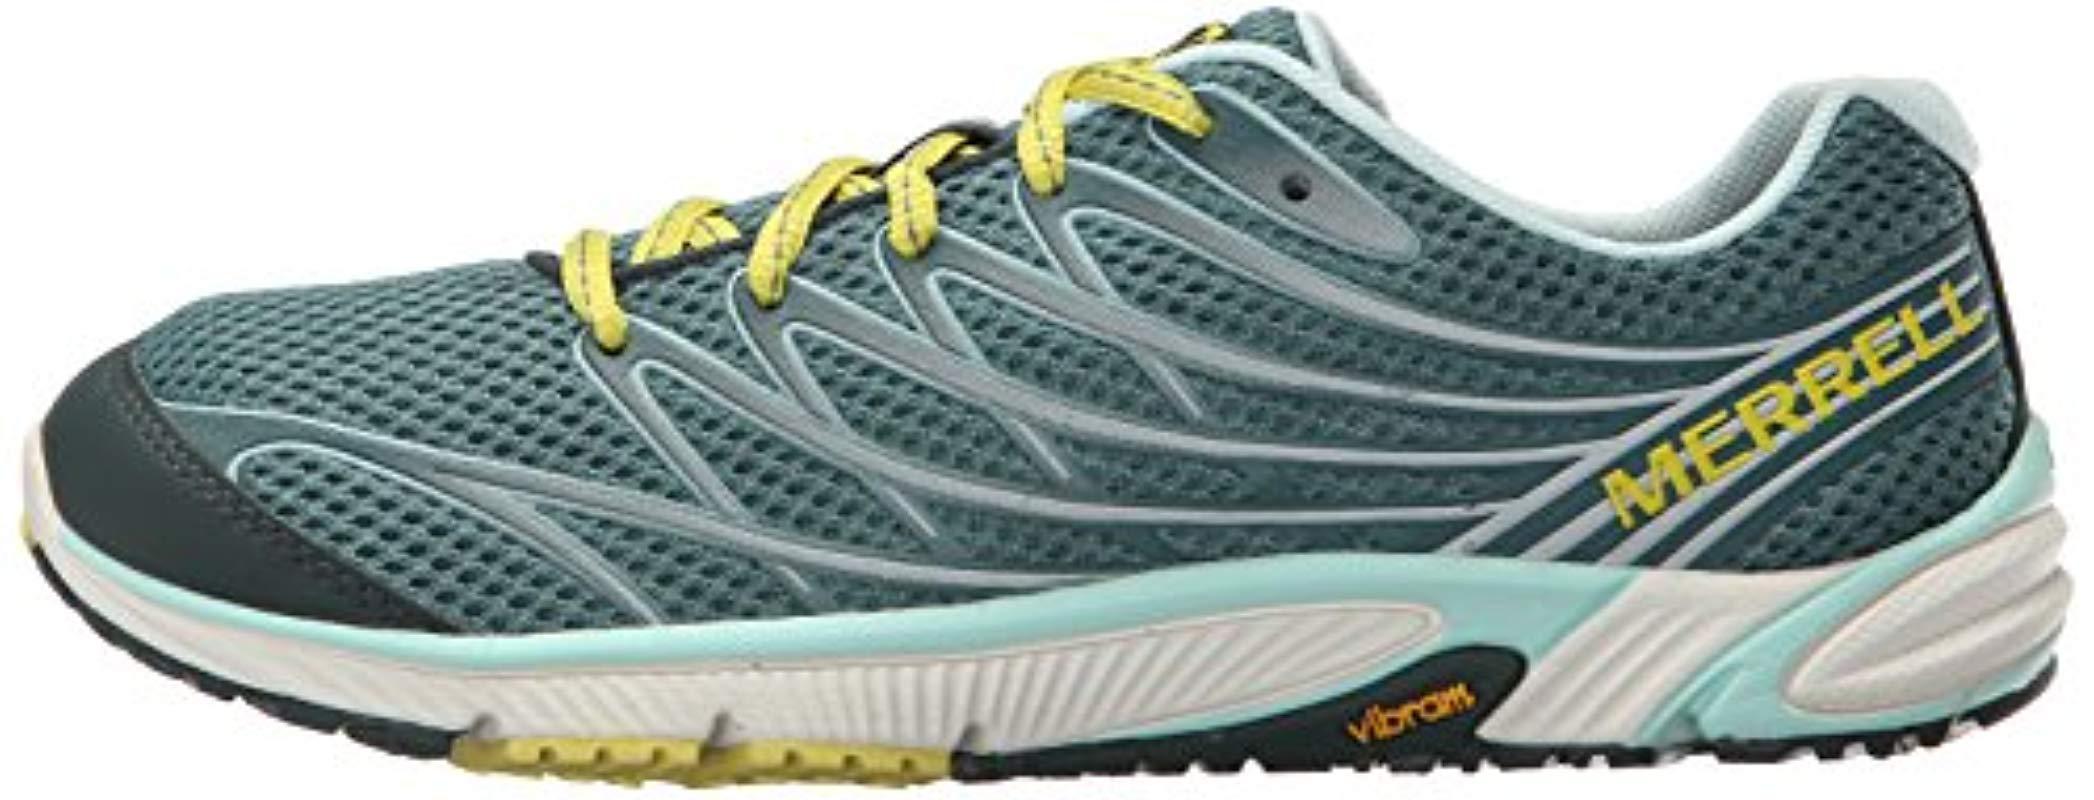 Merrell Lace Bare Access Arc 4 Trail Shoe in -